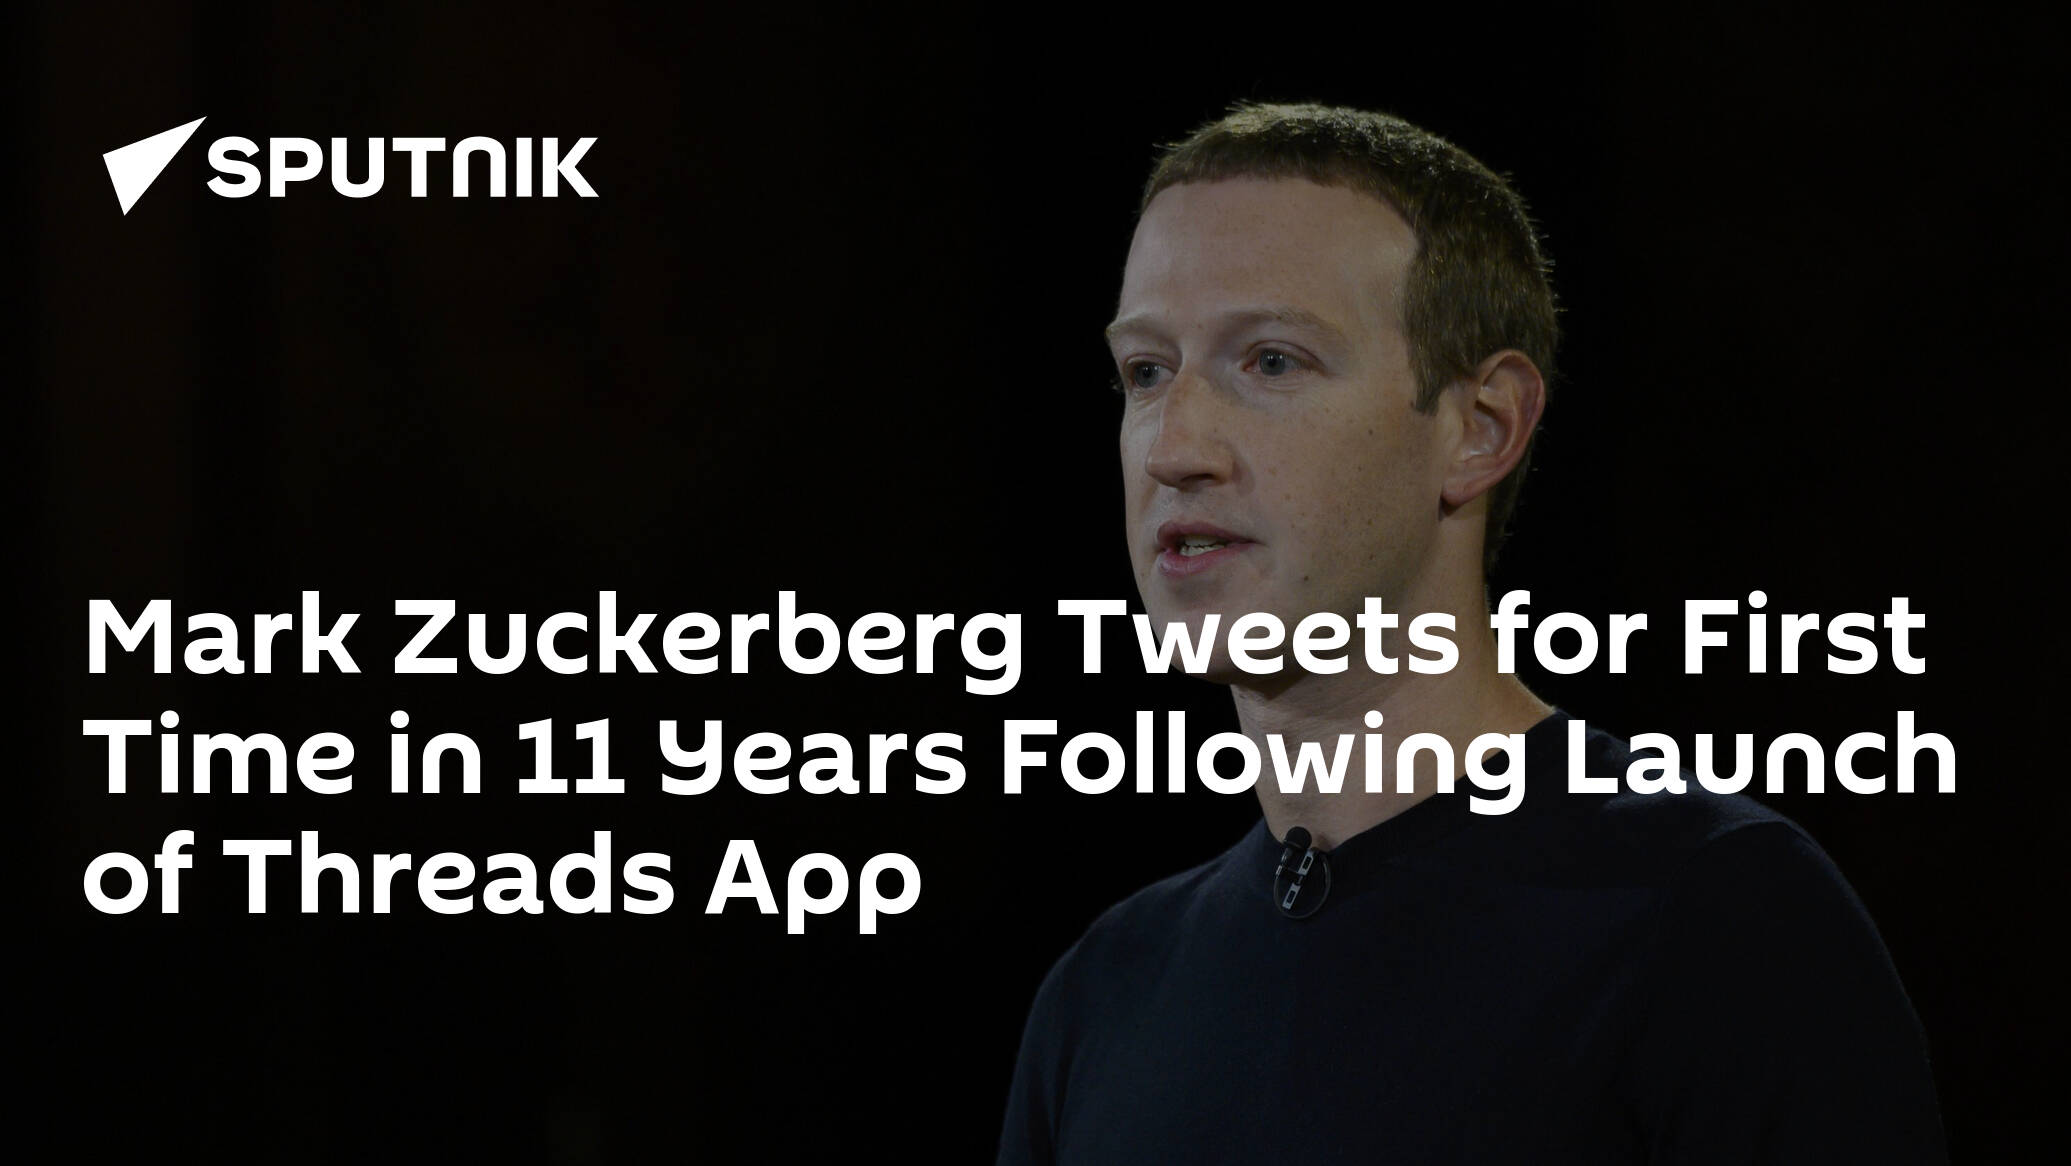 Mark Zuckerberg Tweets for First Time in 11 Years Following Launch of Threads App